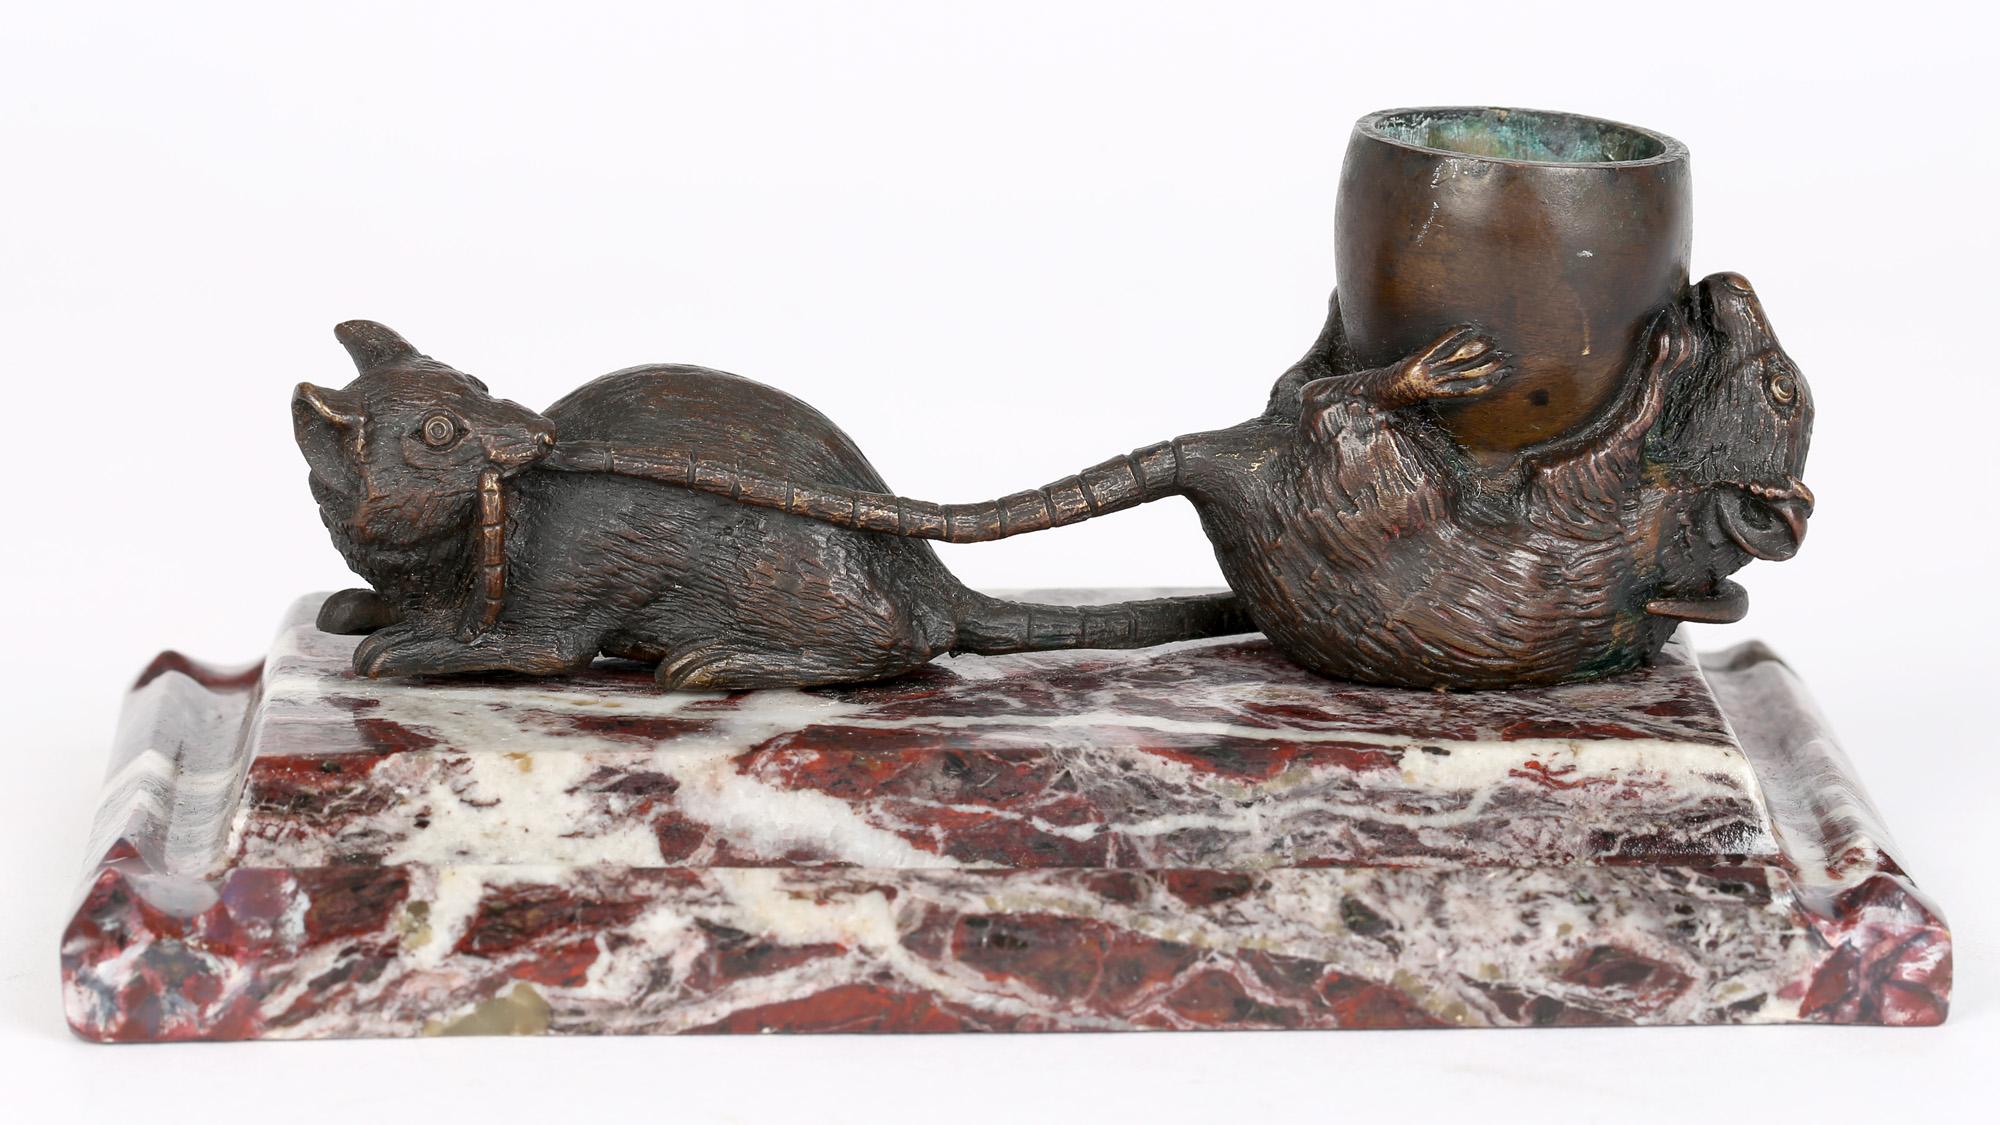 An antique French novelty bronze inkwell modeled as 'Les deux rats et l'oeuf' mounted on a red veined marble base and dating from the latter 19th century. The inkwell is based on the French fable by Jean de La Fontaine 'The Two Rats and the Egg' and